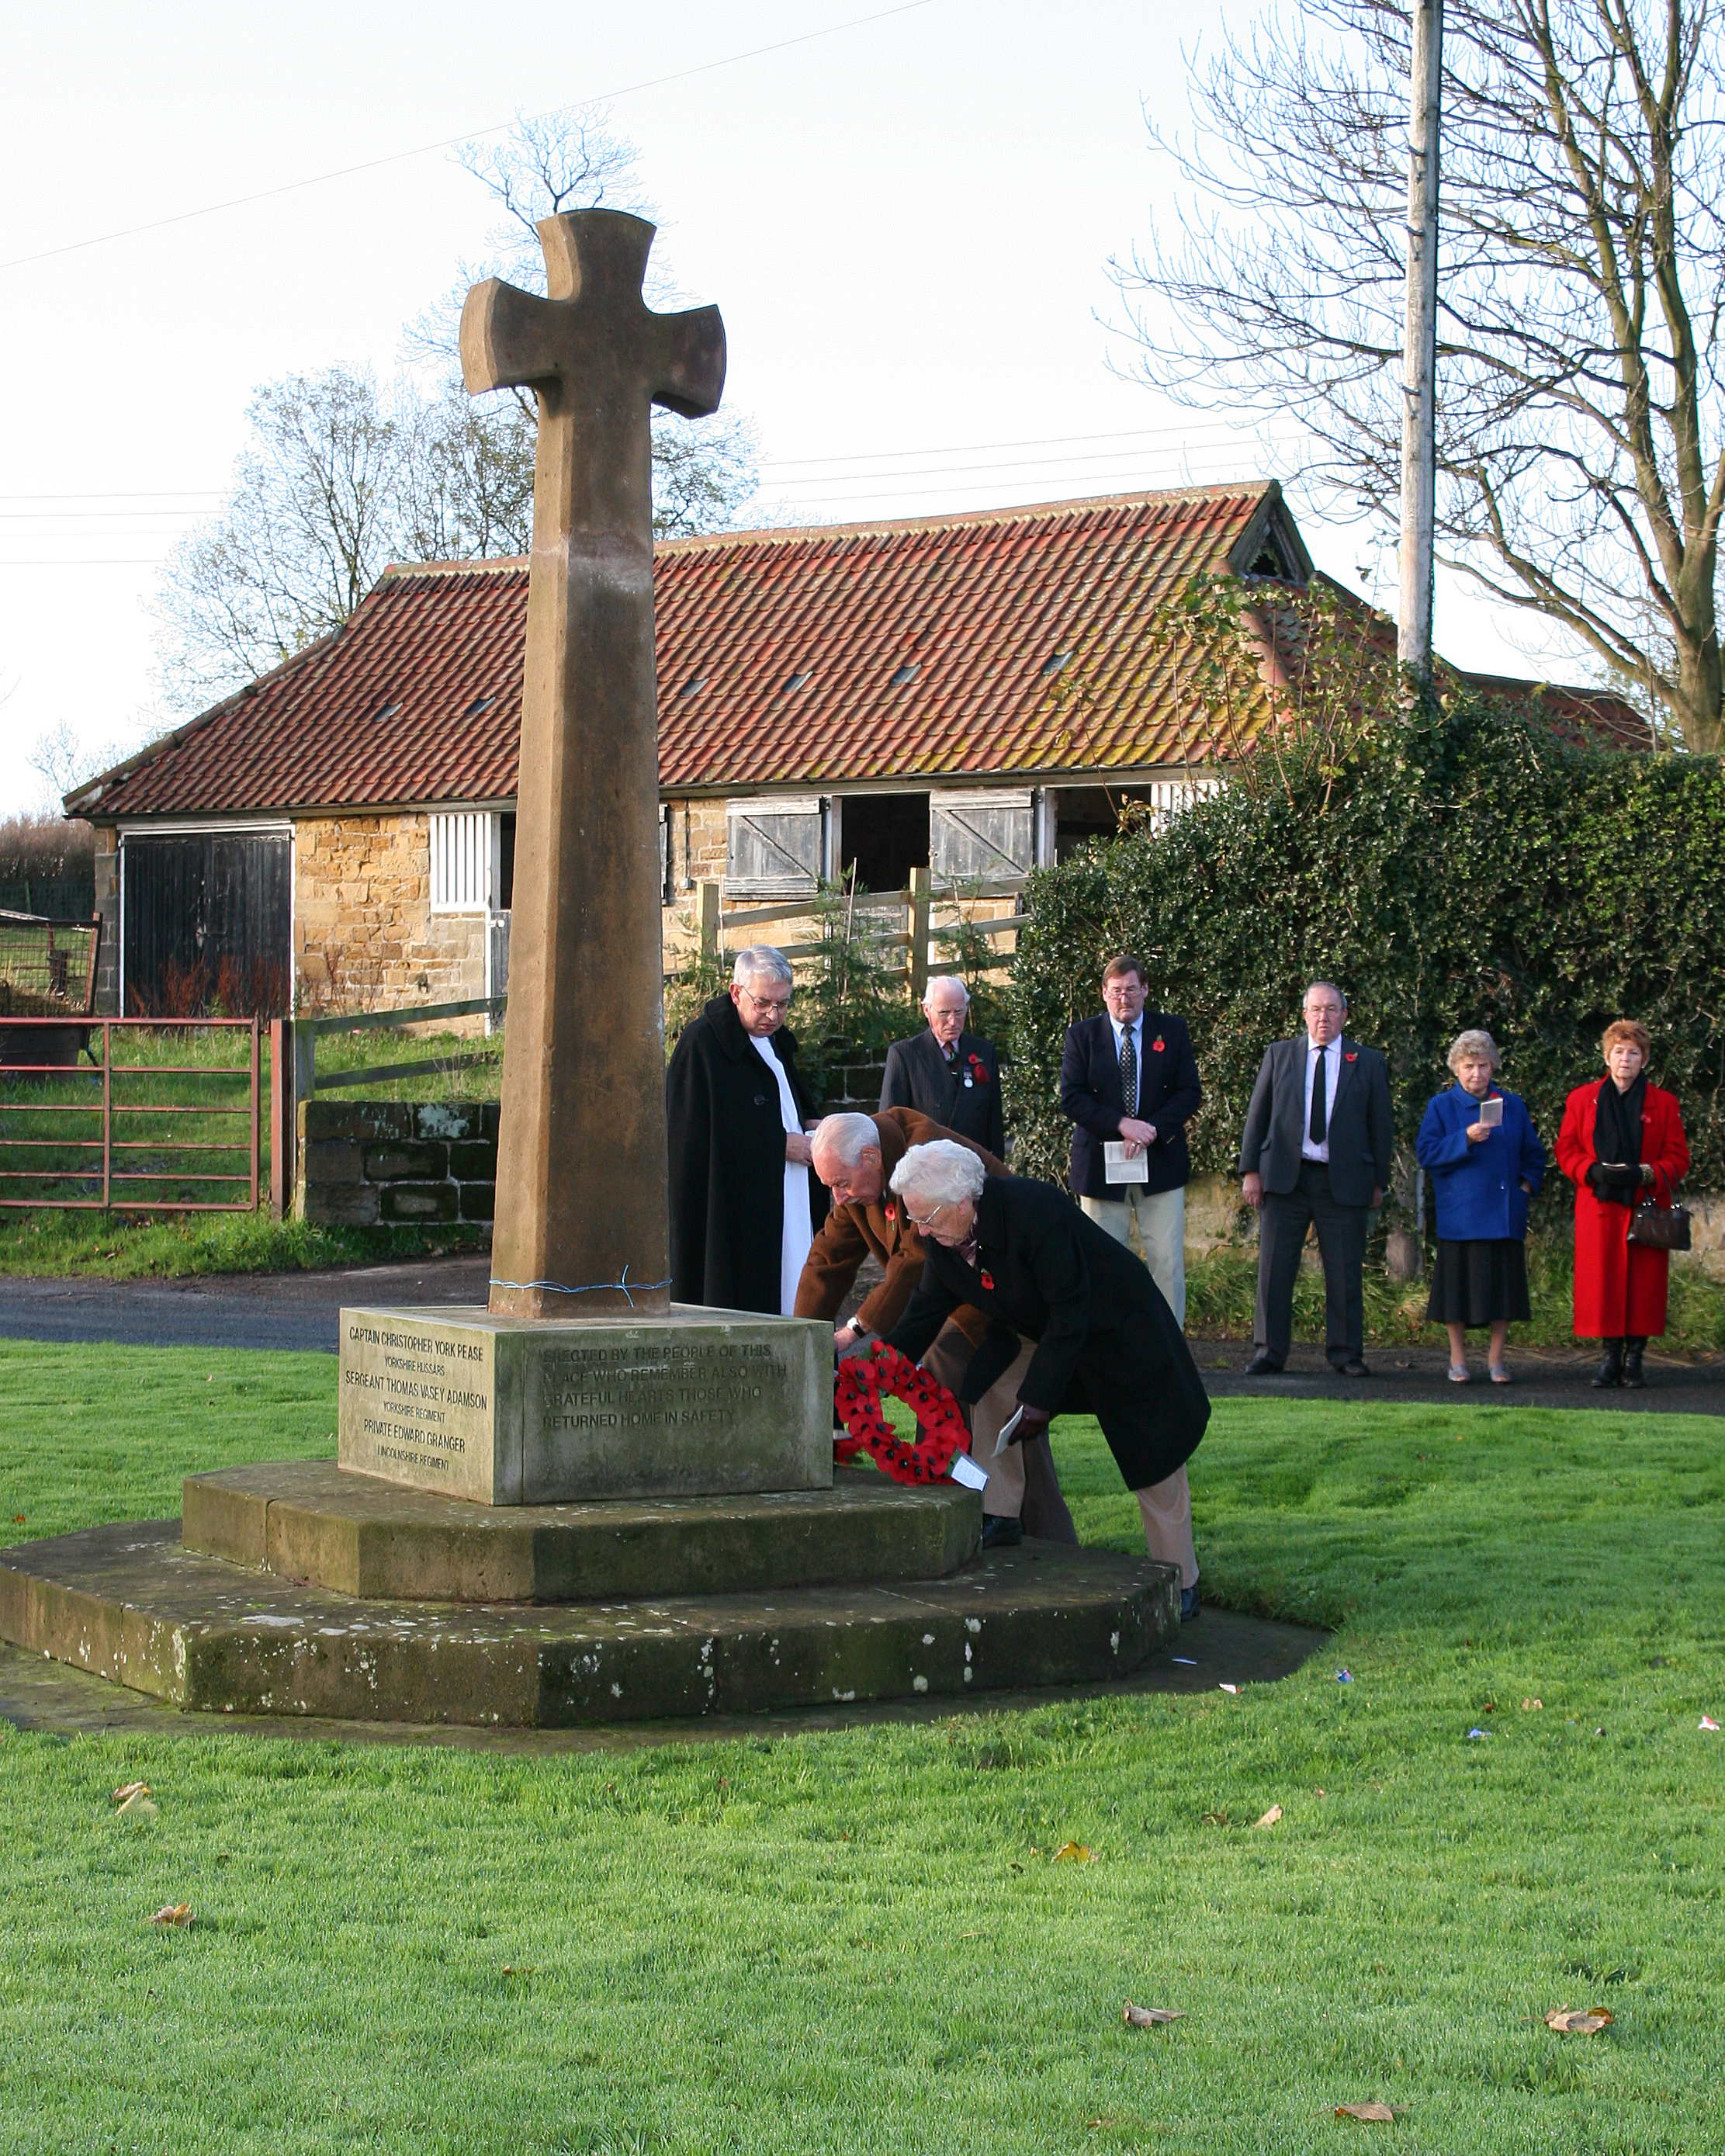 Members of the parish laying wreaths of red poppies at the base of the memorial